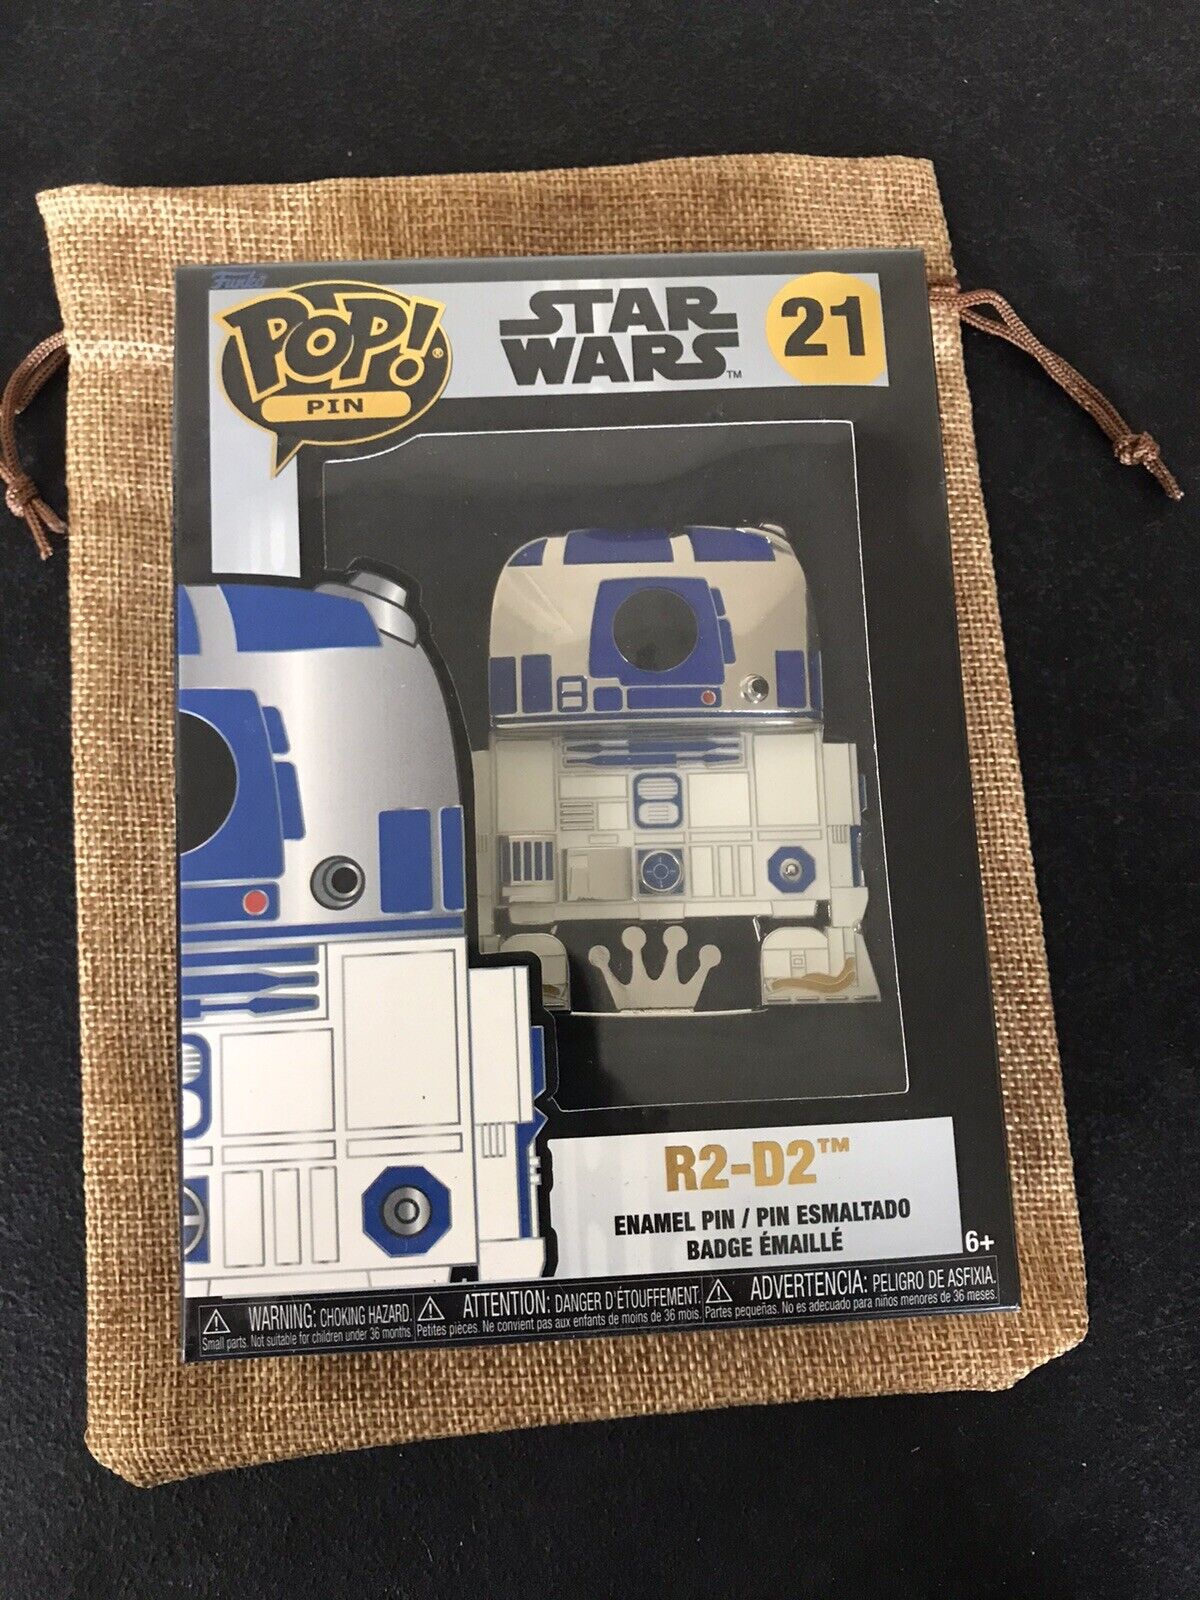 Star Wars Funko POP PIN 21 R2-D2 DROID Collectible Enamel Pin Removable Stand